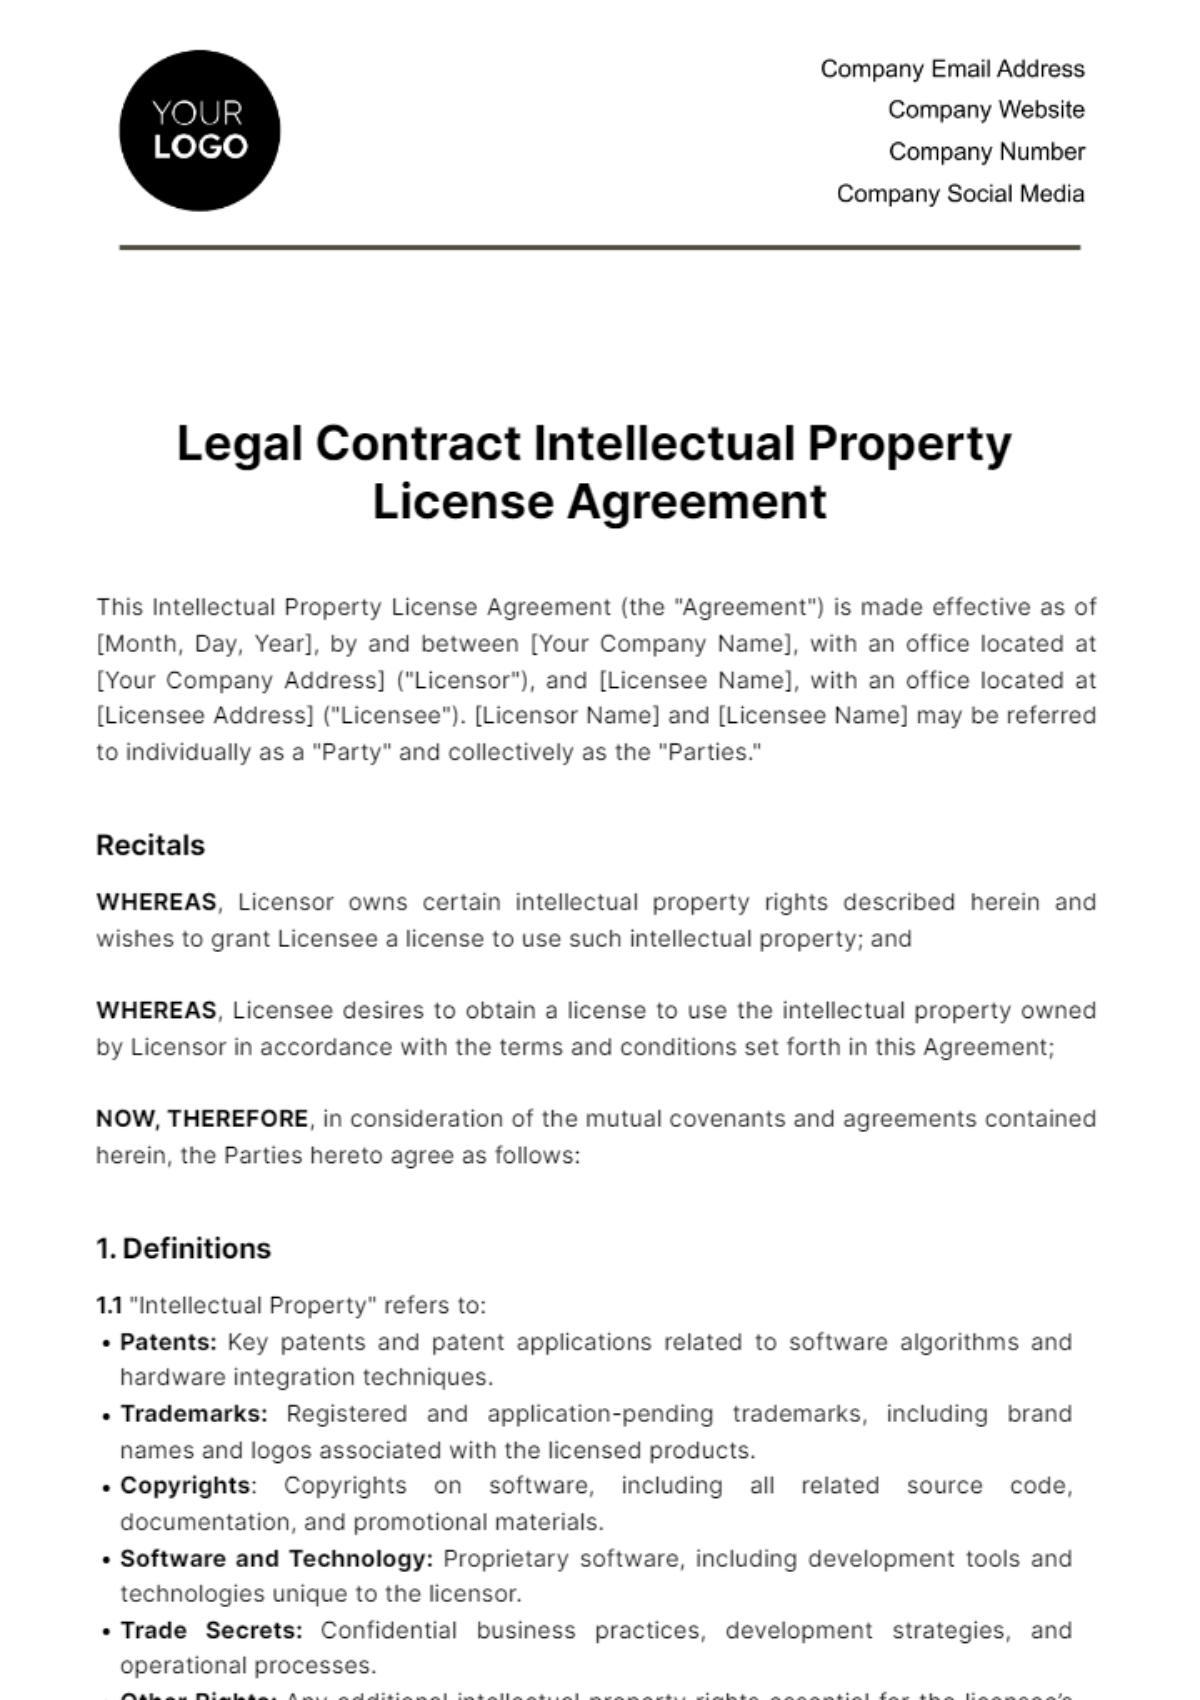 Free Legal Contract  Intellectual Property License Agreement Template